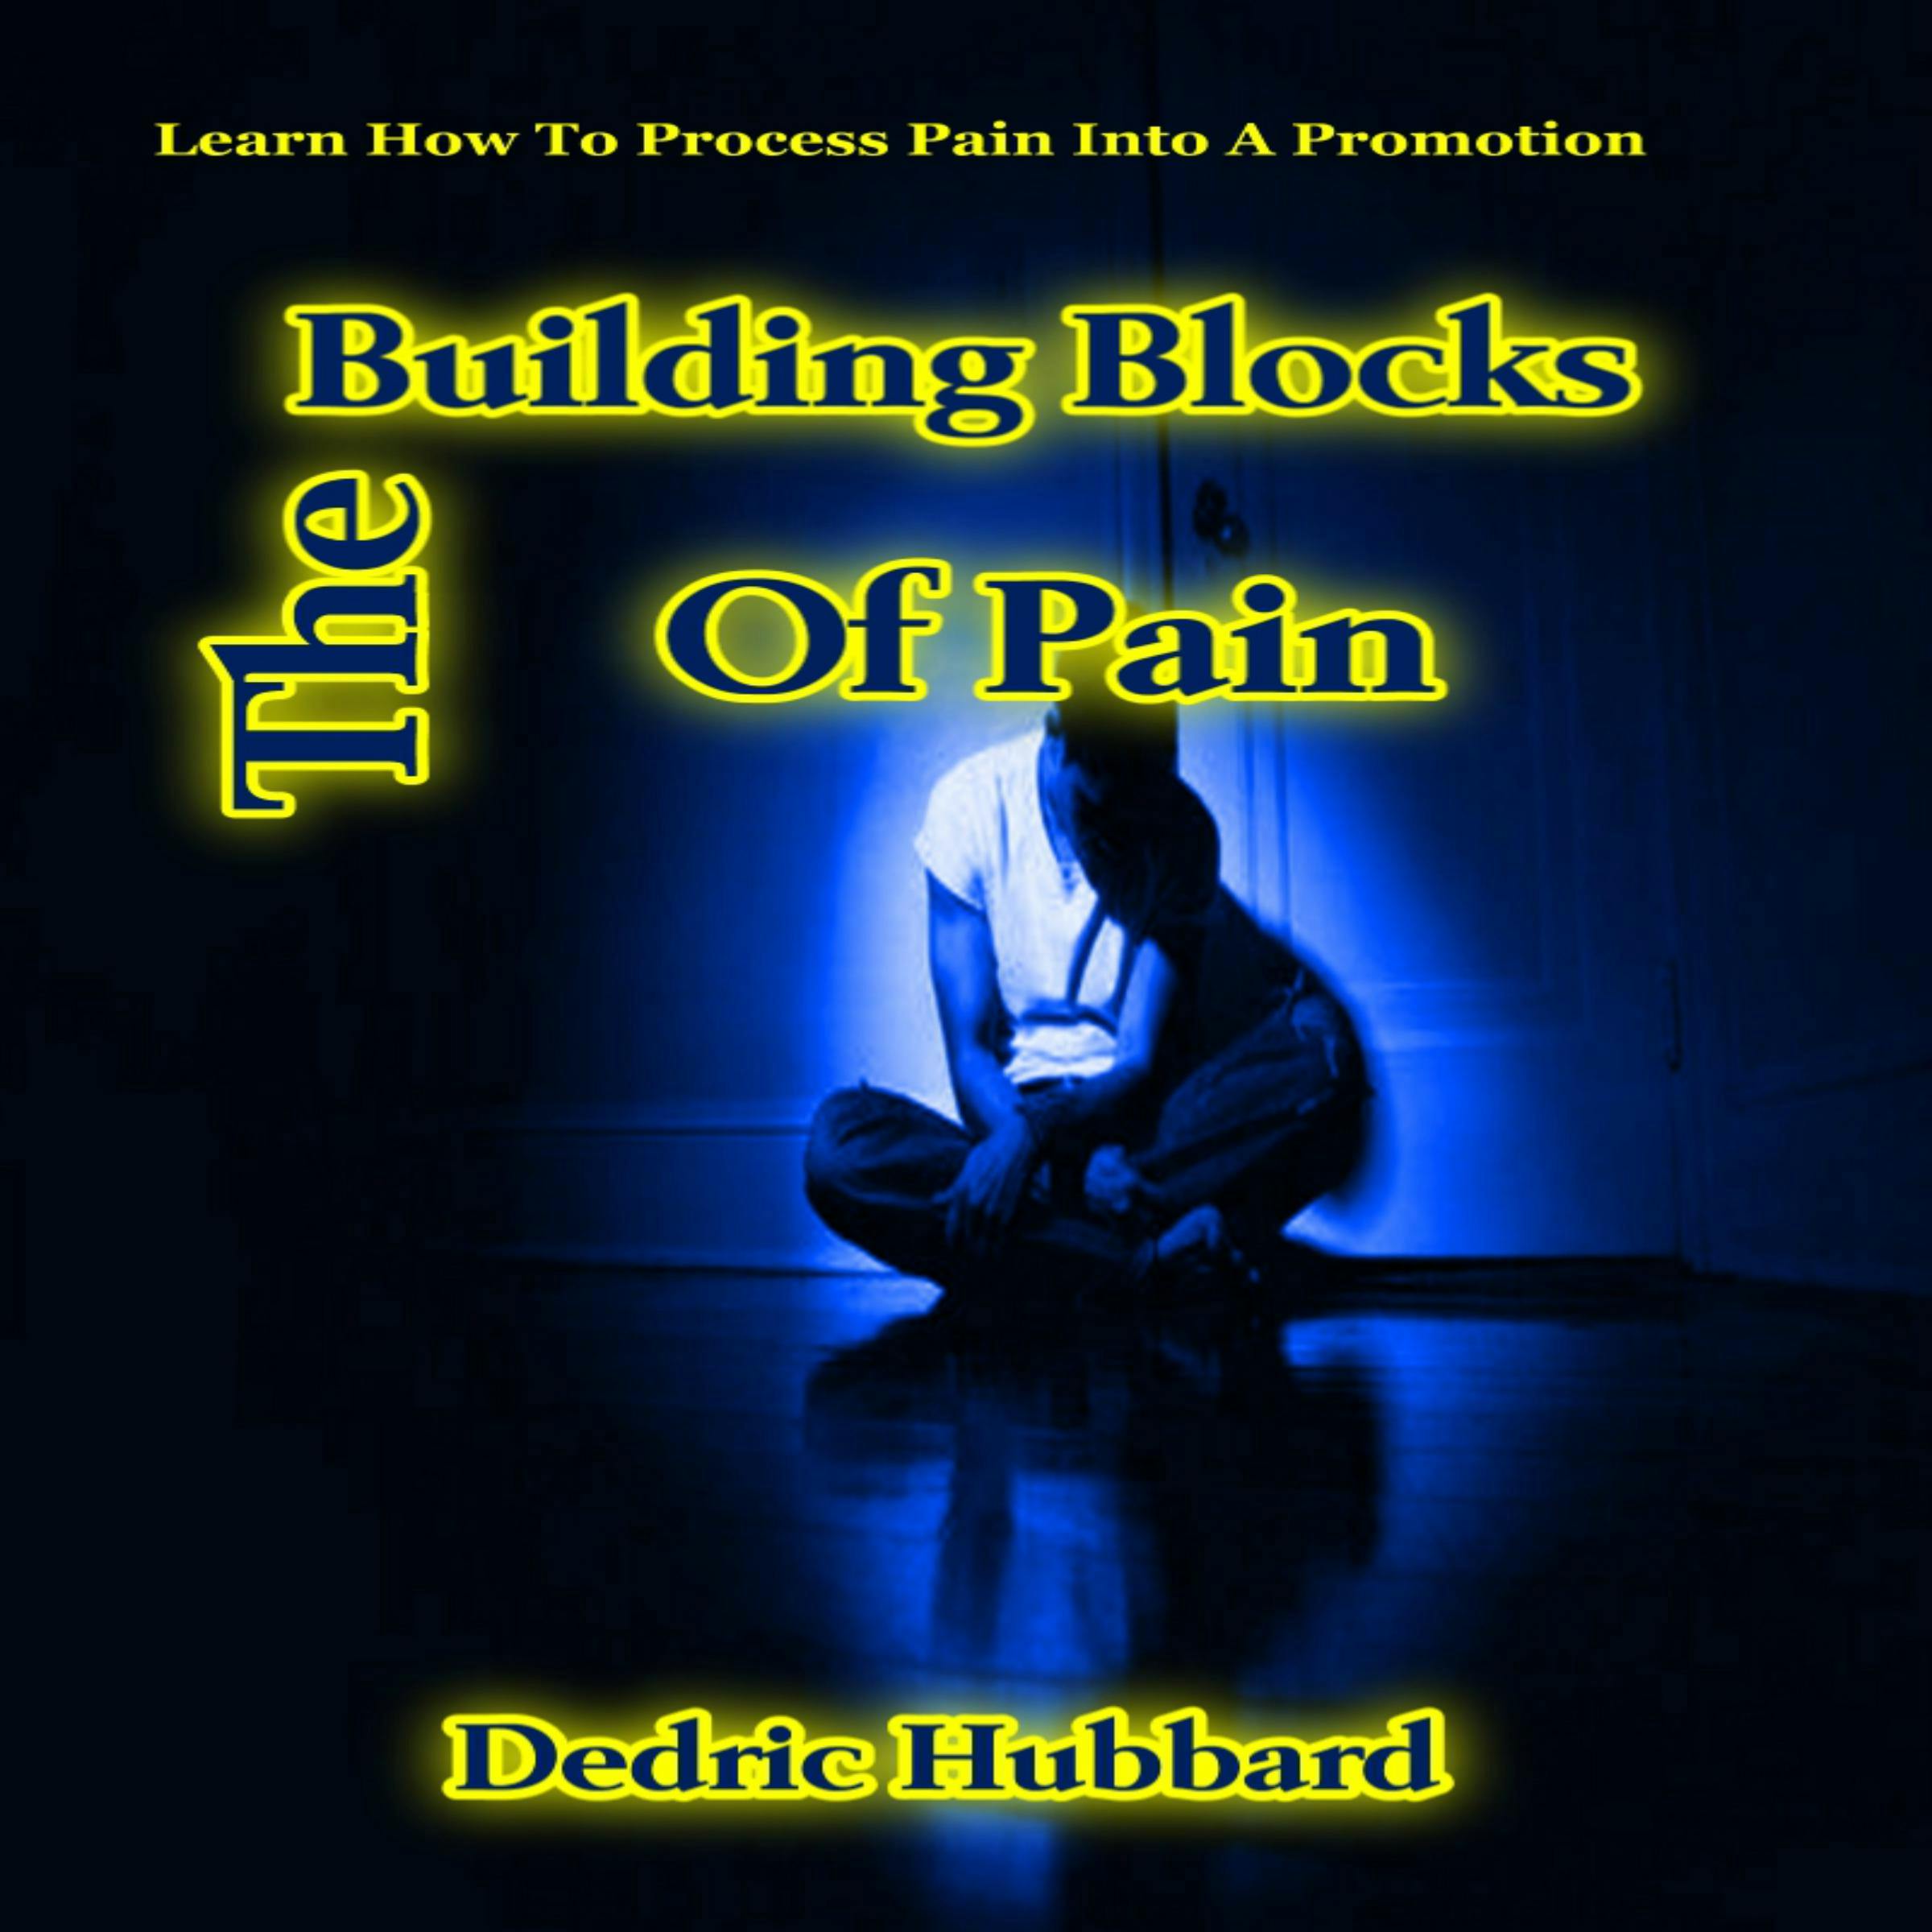 The Building Blocks Of Pain: Learn How To Process Pain Into A Promotion - Dedric Hubbard